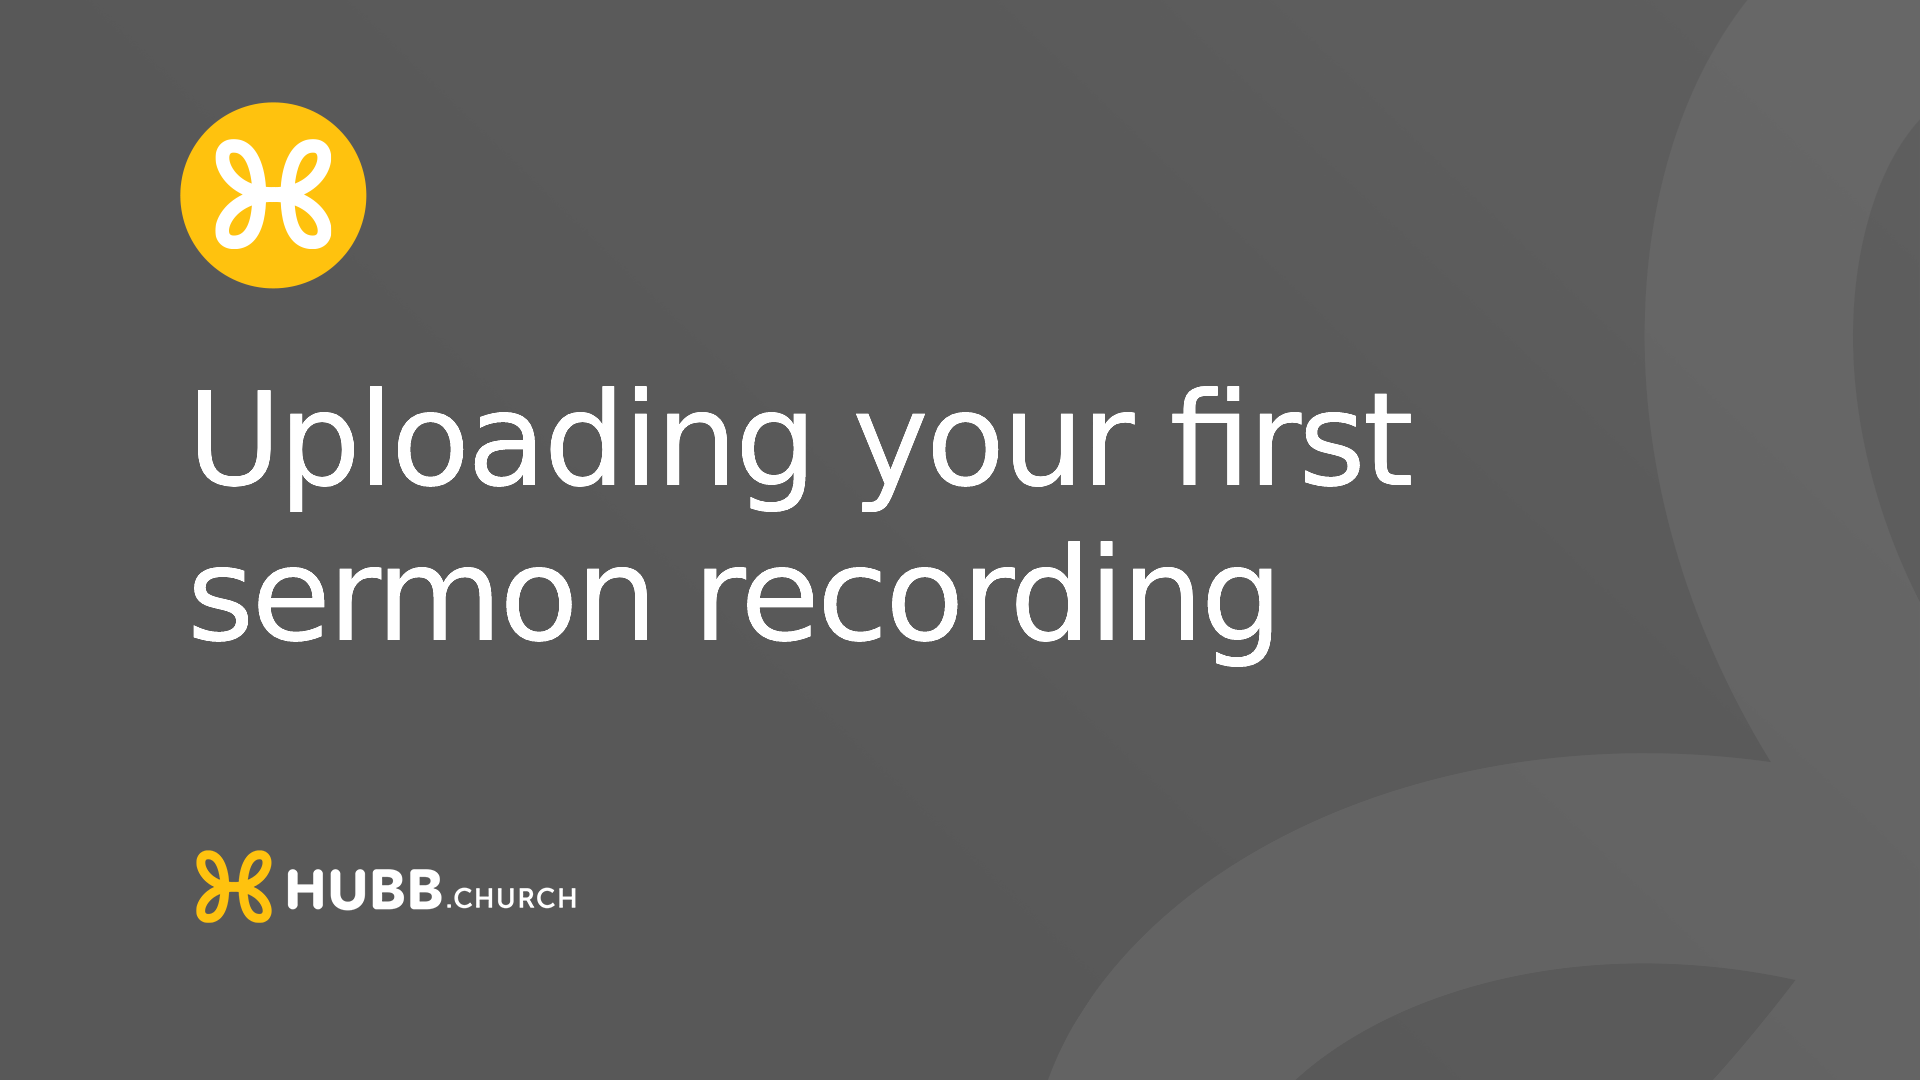 Uploading your first sermon recording